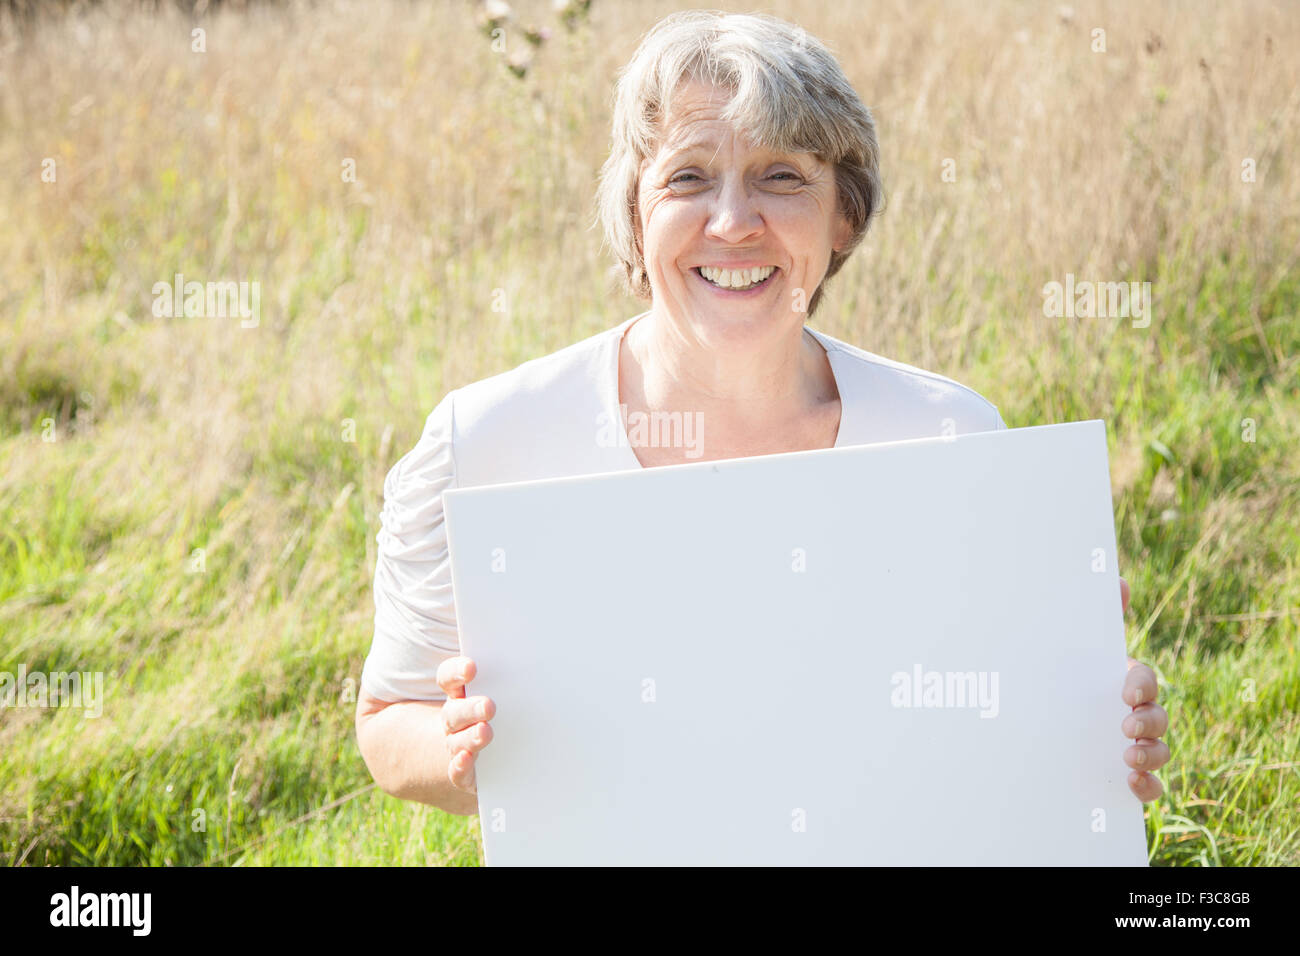 Old age woman holding blank white sign Stock Photo